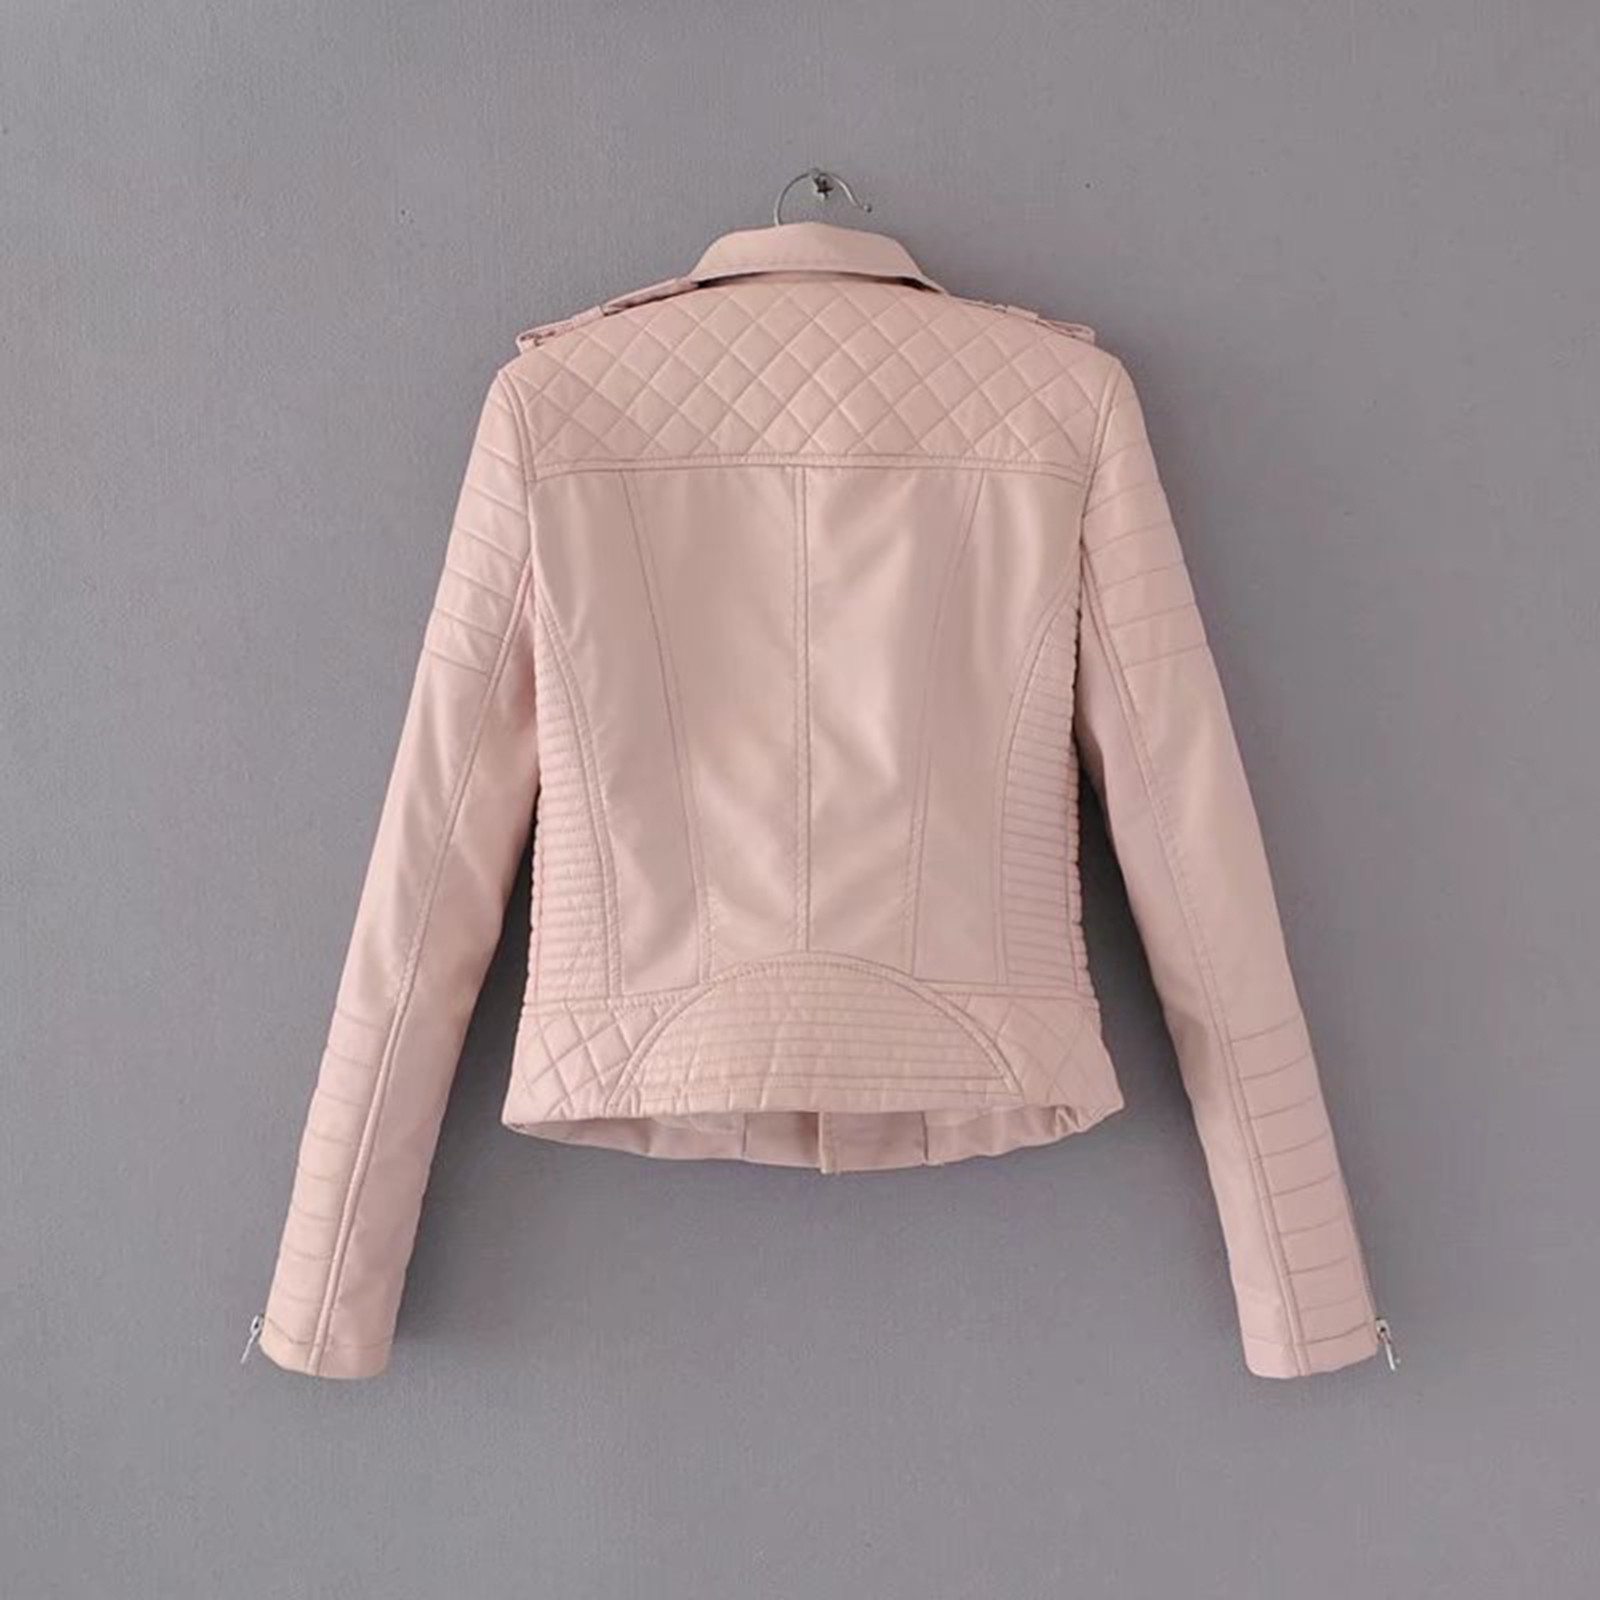 HSMQHJWE Knit Jackets And Blazers Soft Pile Vest Women Leather Short Jacket Jacket Zipper Casual Quilting Trend Pu Short Jacket Fashion Motorcycle Jacket Down Jackets For Women Petite - image 4 of 4